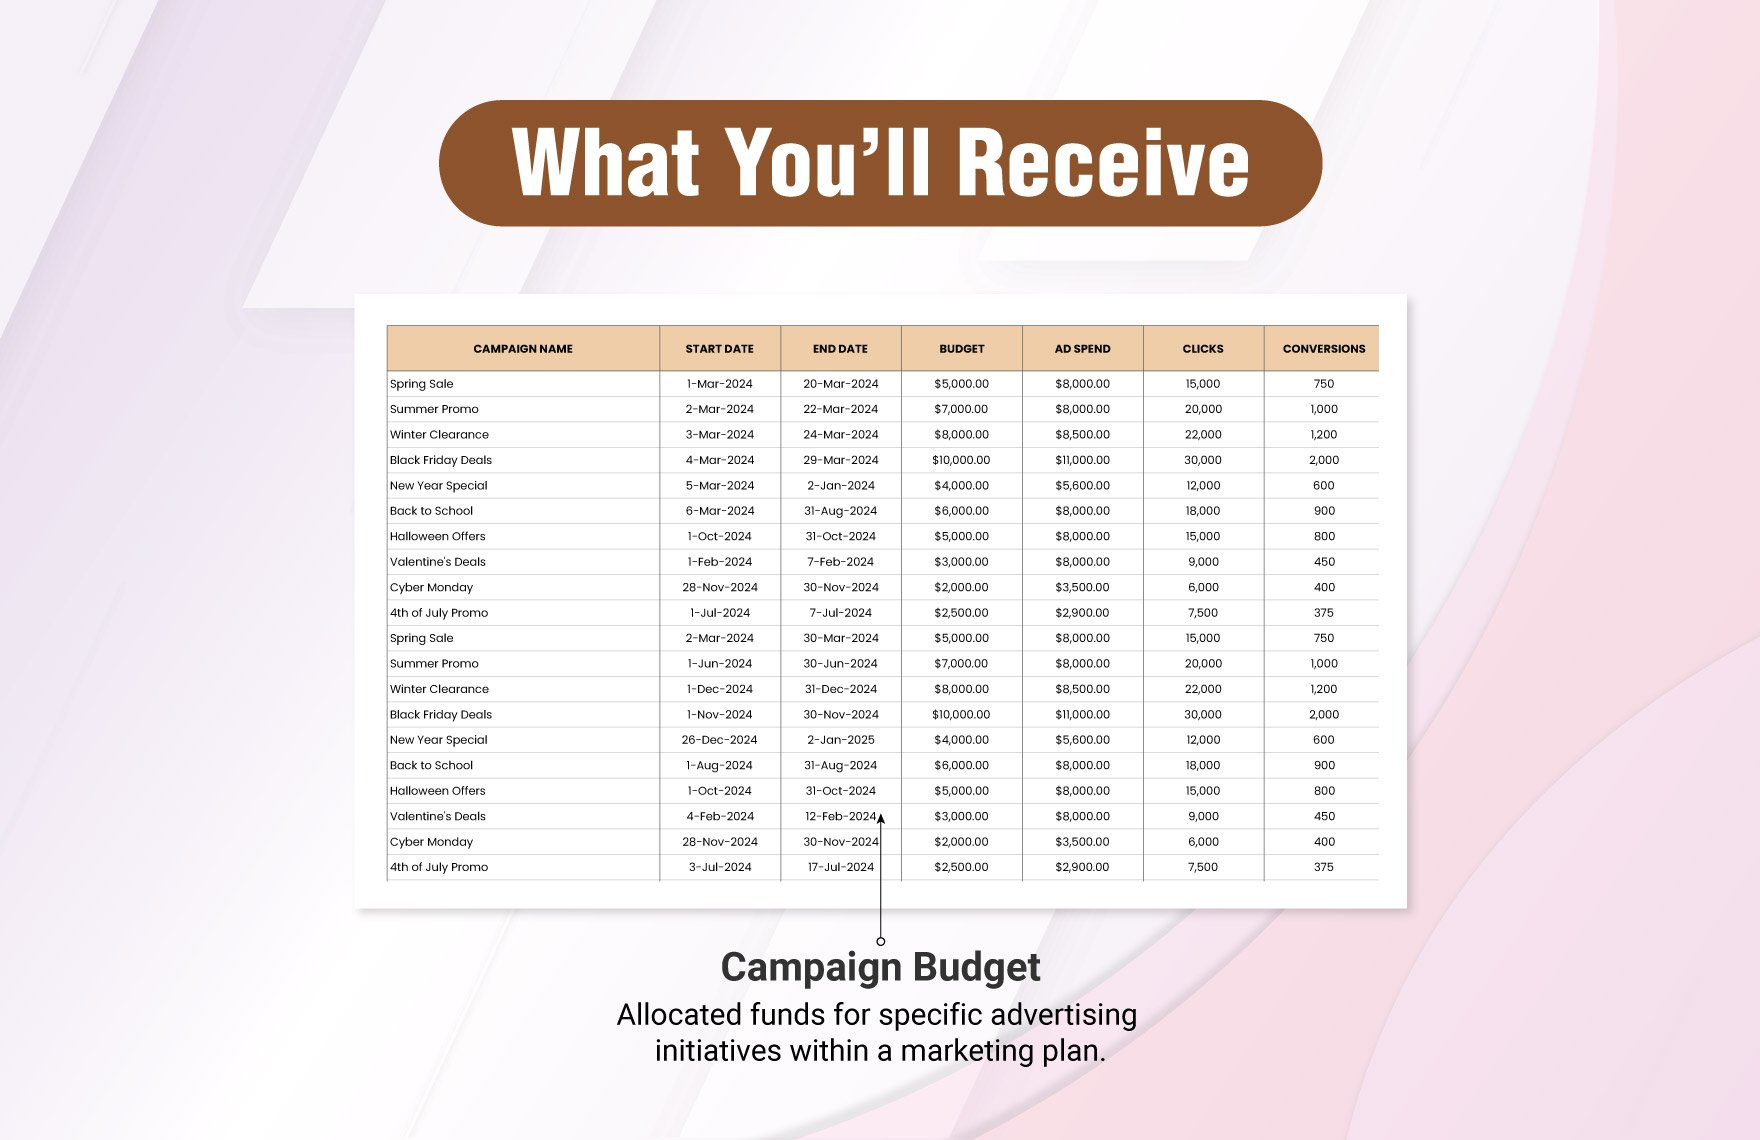 Advertising Ad Spend Efficiency Tracker Template